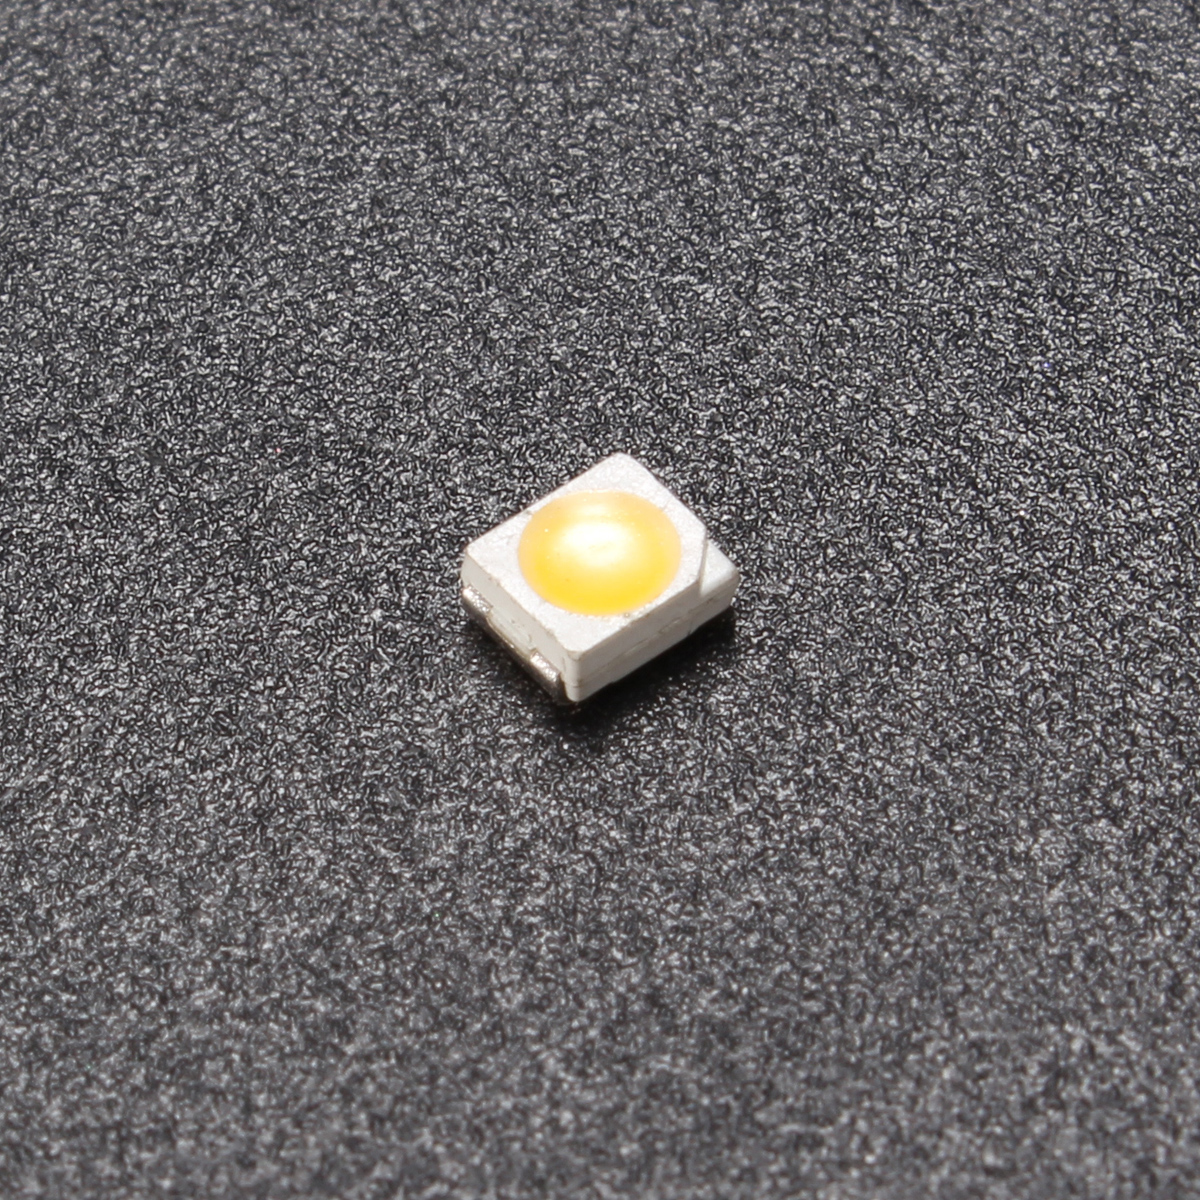 100PCS-SMD3528-1210-1W-100LM-Warm-White-LED-Backlight-DIY-Chip-Bead-For-TV-Application-1128676-3